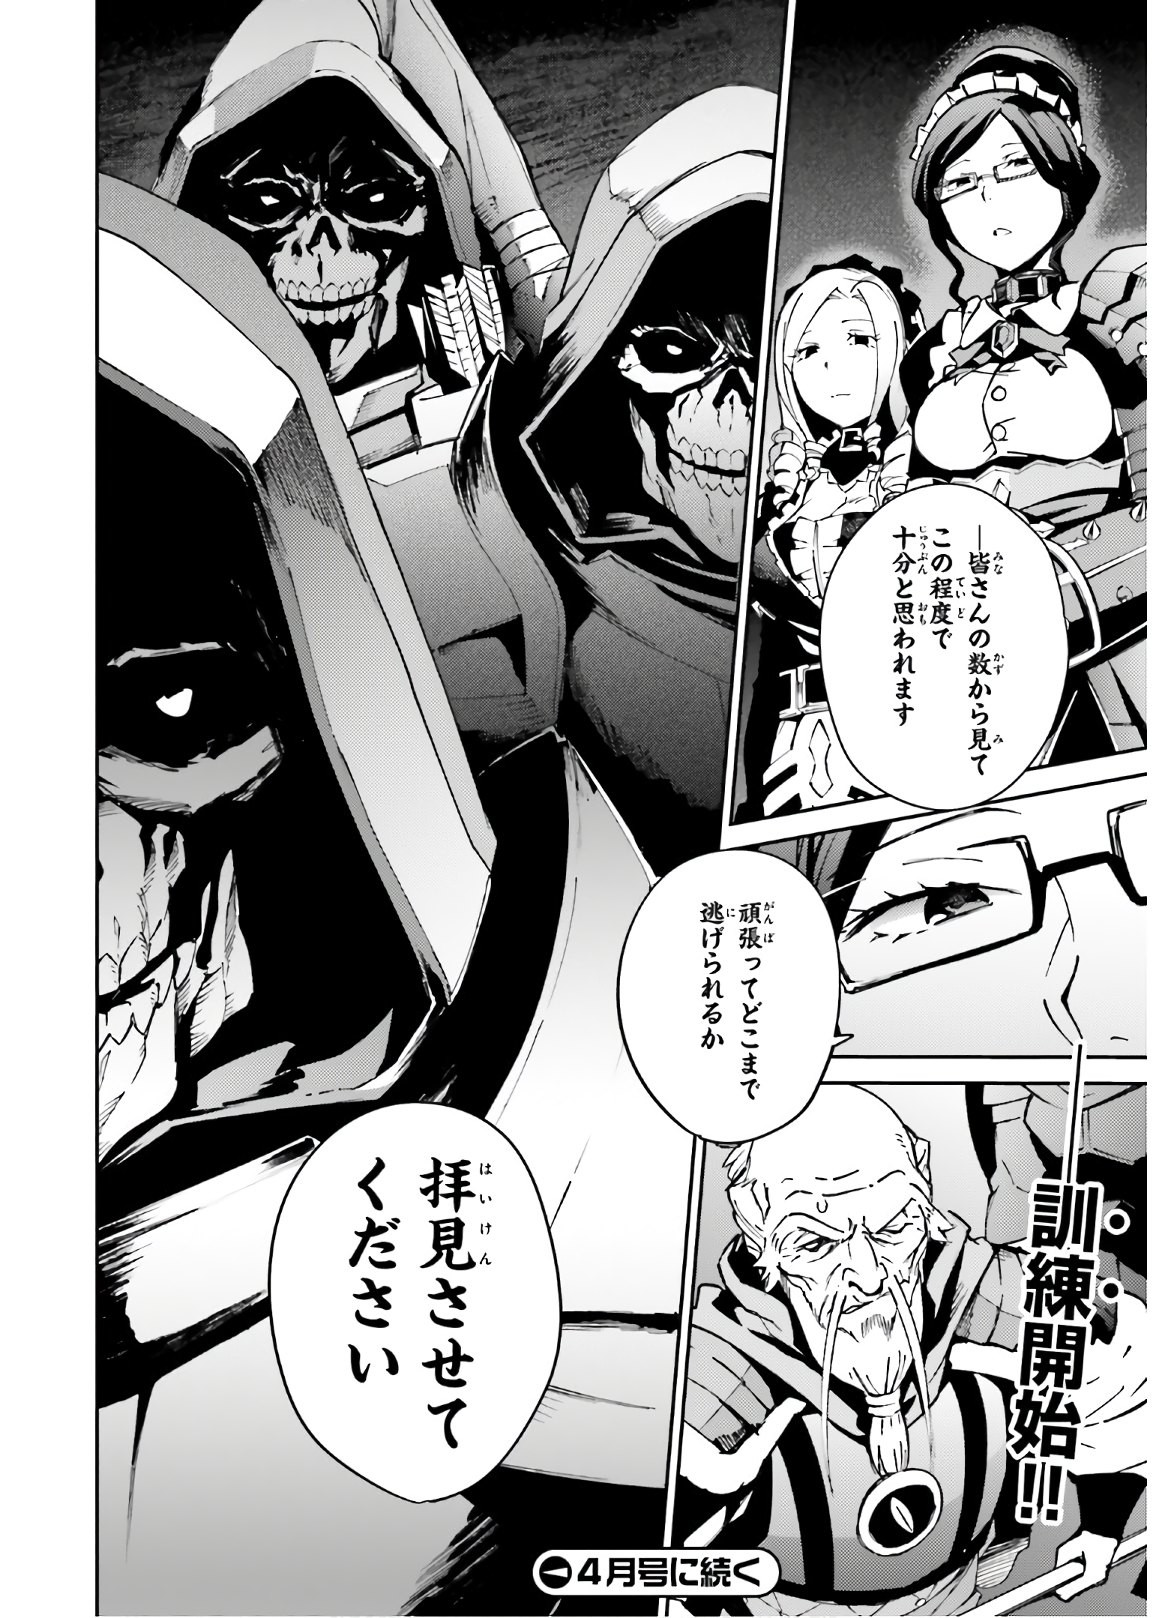 Overlord - Chapter 62 - Page 36